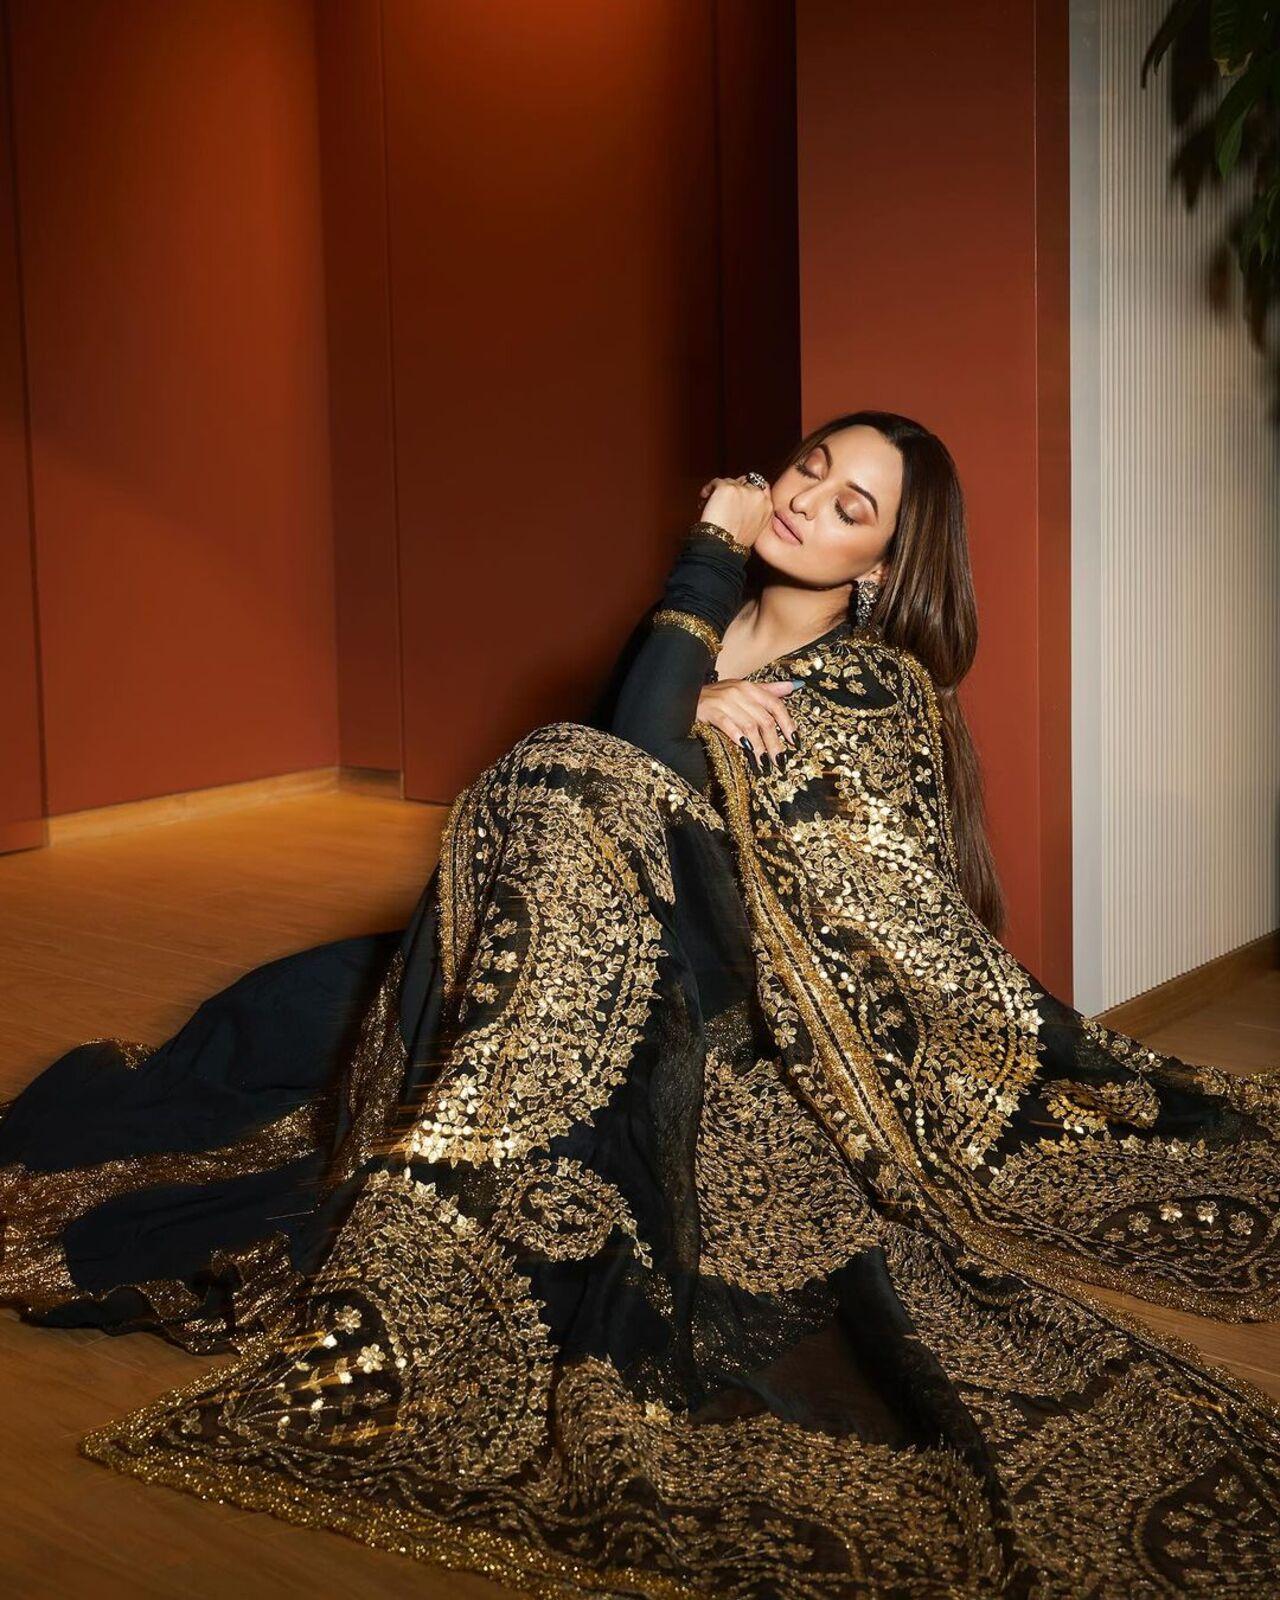 Sonakshi Sinha, who has already captivated the audience with her glimpse in promos and songs, serves a regal look in this black Anarkali outfit. 